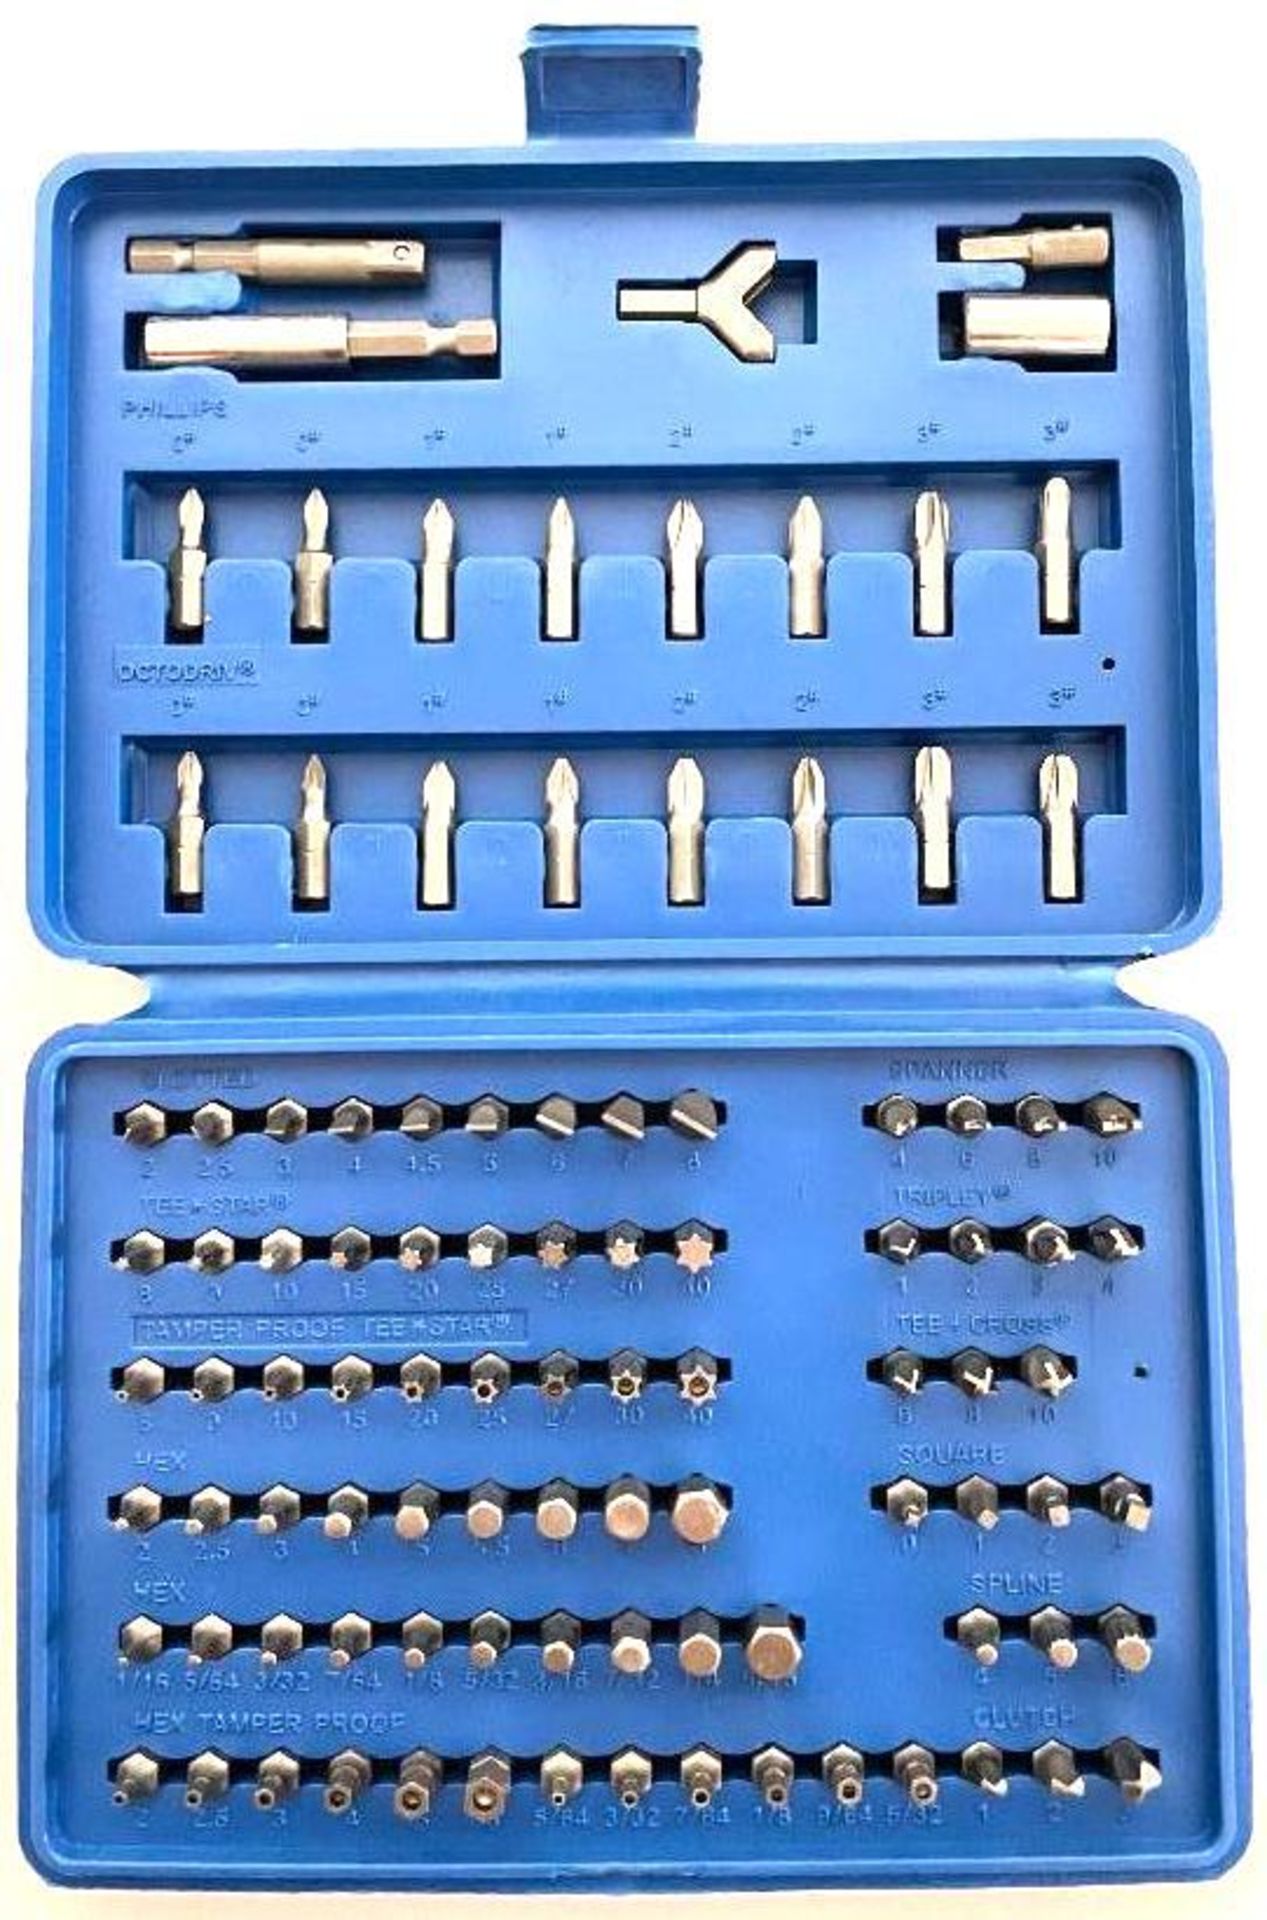 (30) 100PC SECURITY TIP INSERT BITS SET BRAND/MODEL EAZYPOWER 81962 ADDITIONAL INFO TOTAL LOT RETAIL